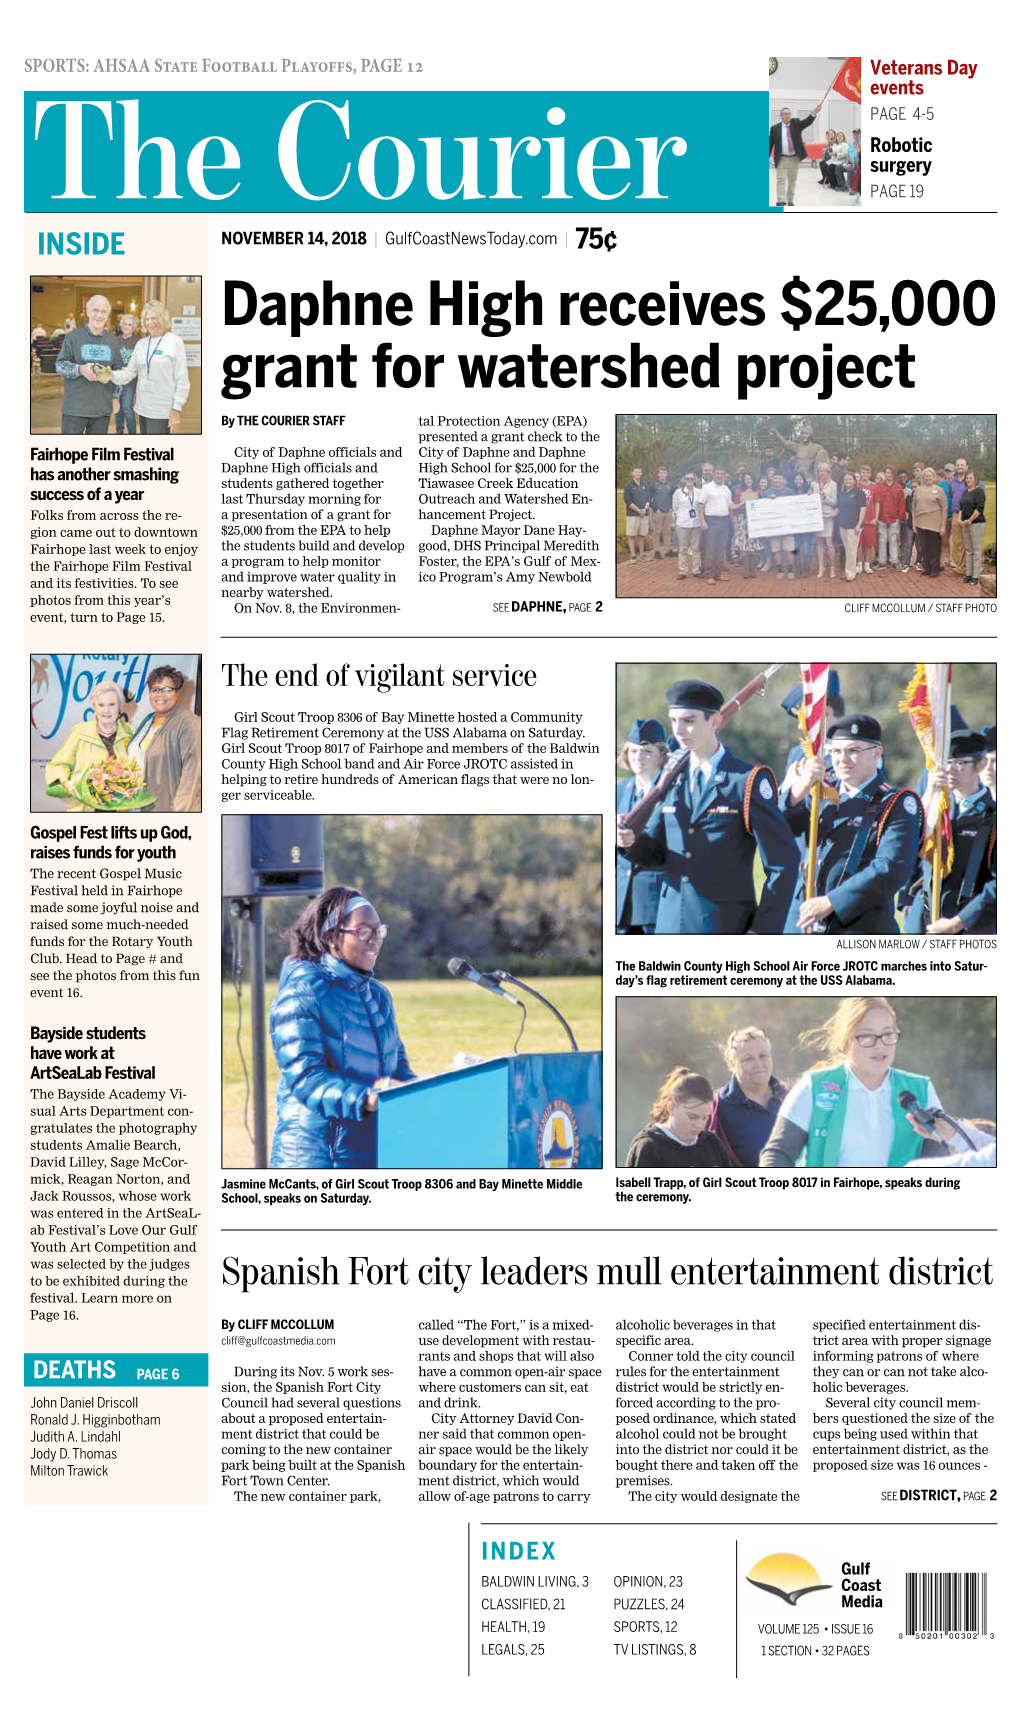 The Courier PAGE 19 INSIDE NOVEMBER 14, 2018 | Gulfcoastnewstoday.Com | 75¢ Daphne High Receives $25,000 Grant for Watershed Project